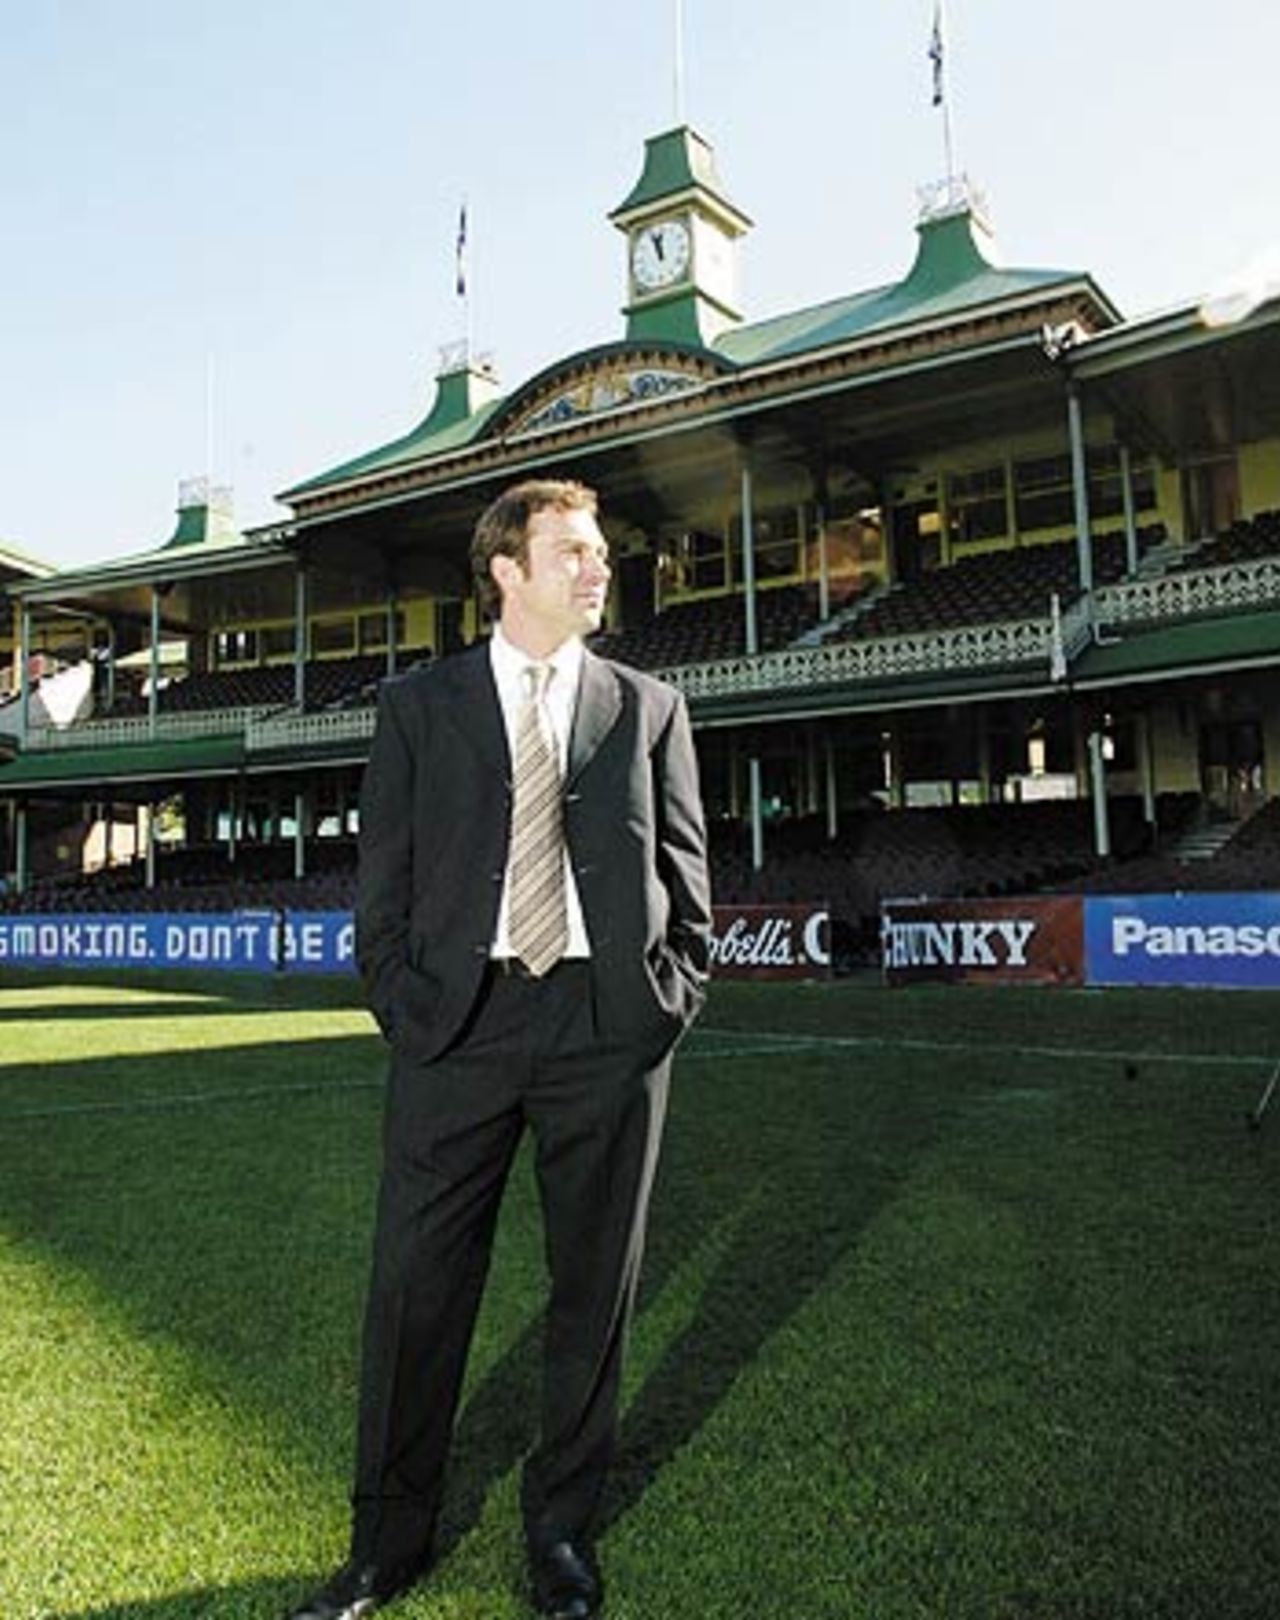 Slater surveys the SCG after his final call, June 9, 2003